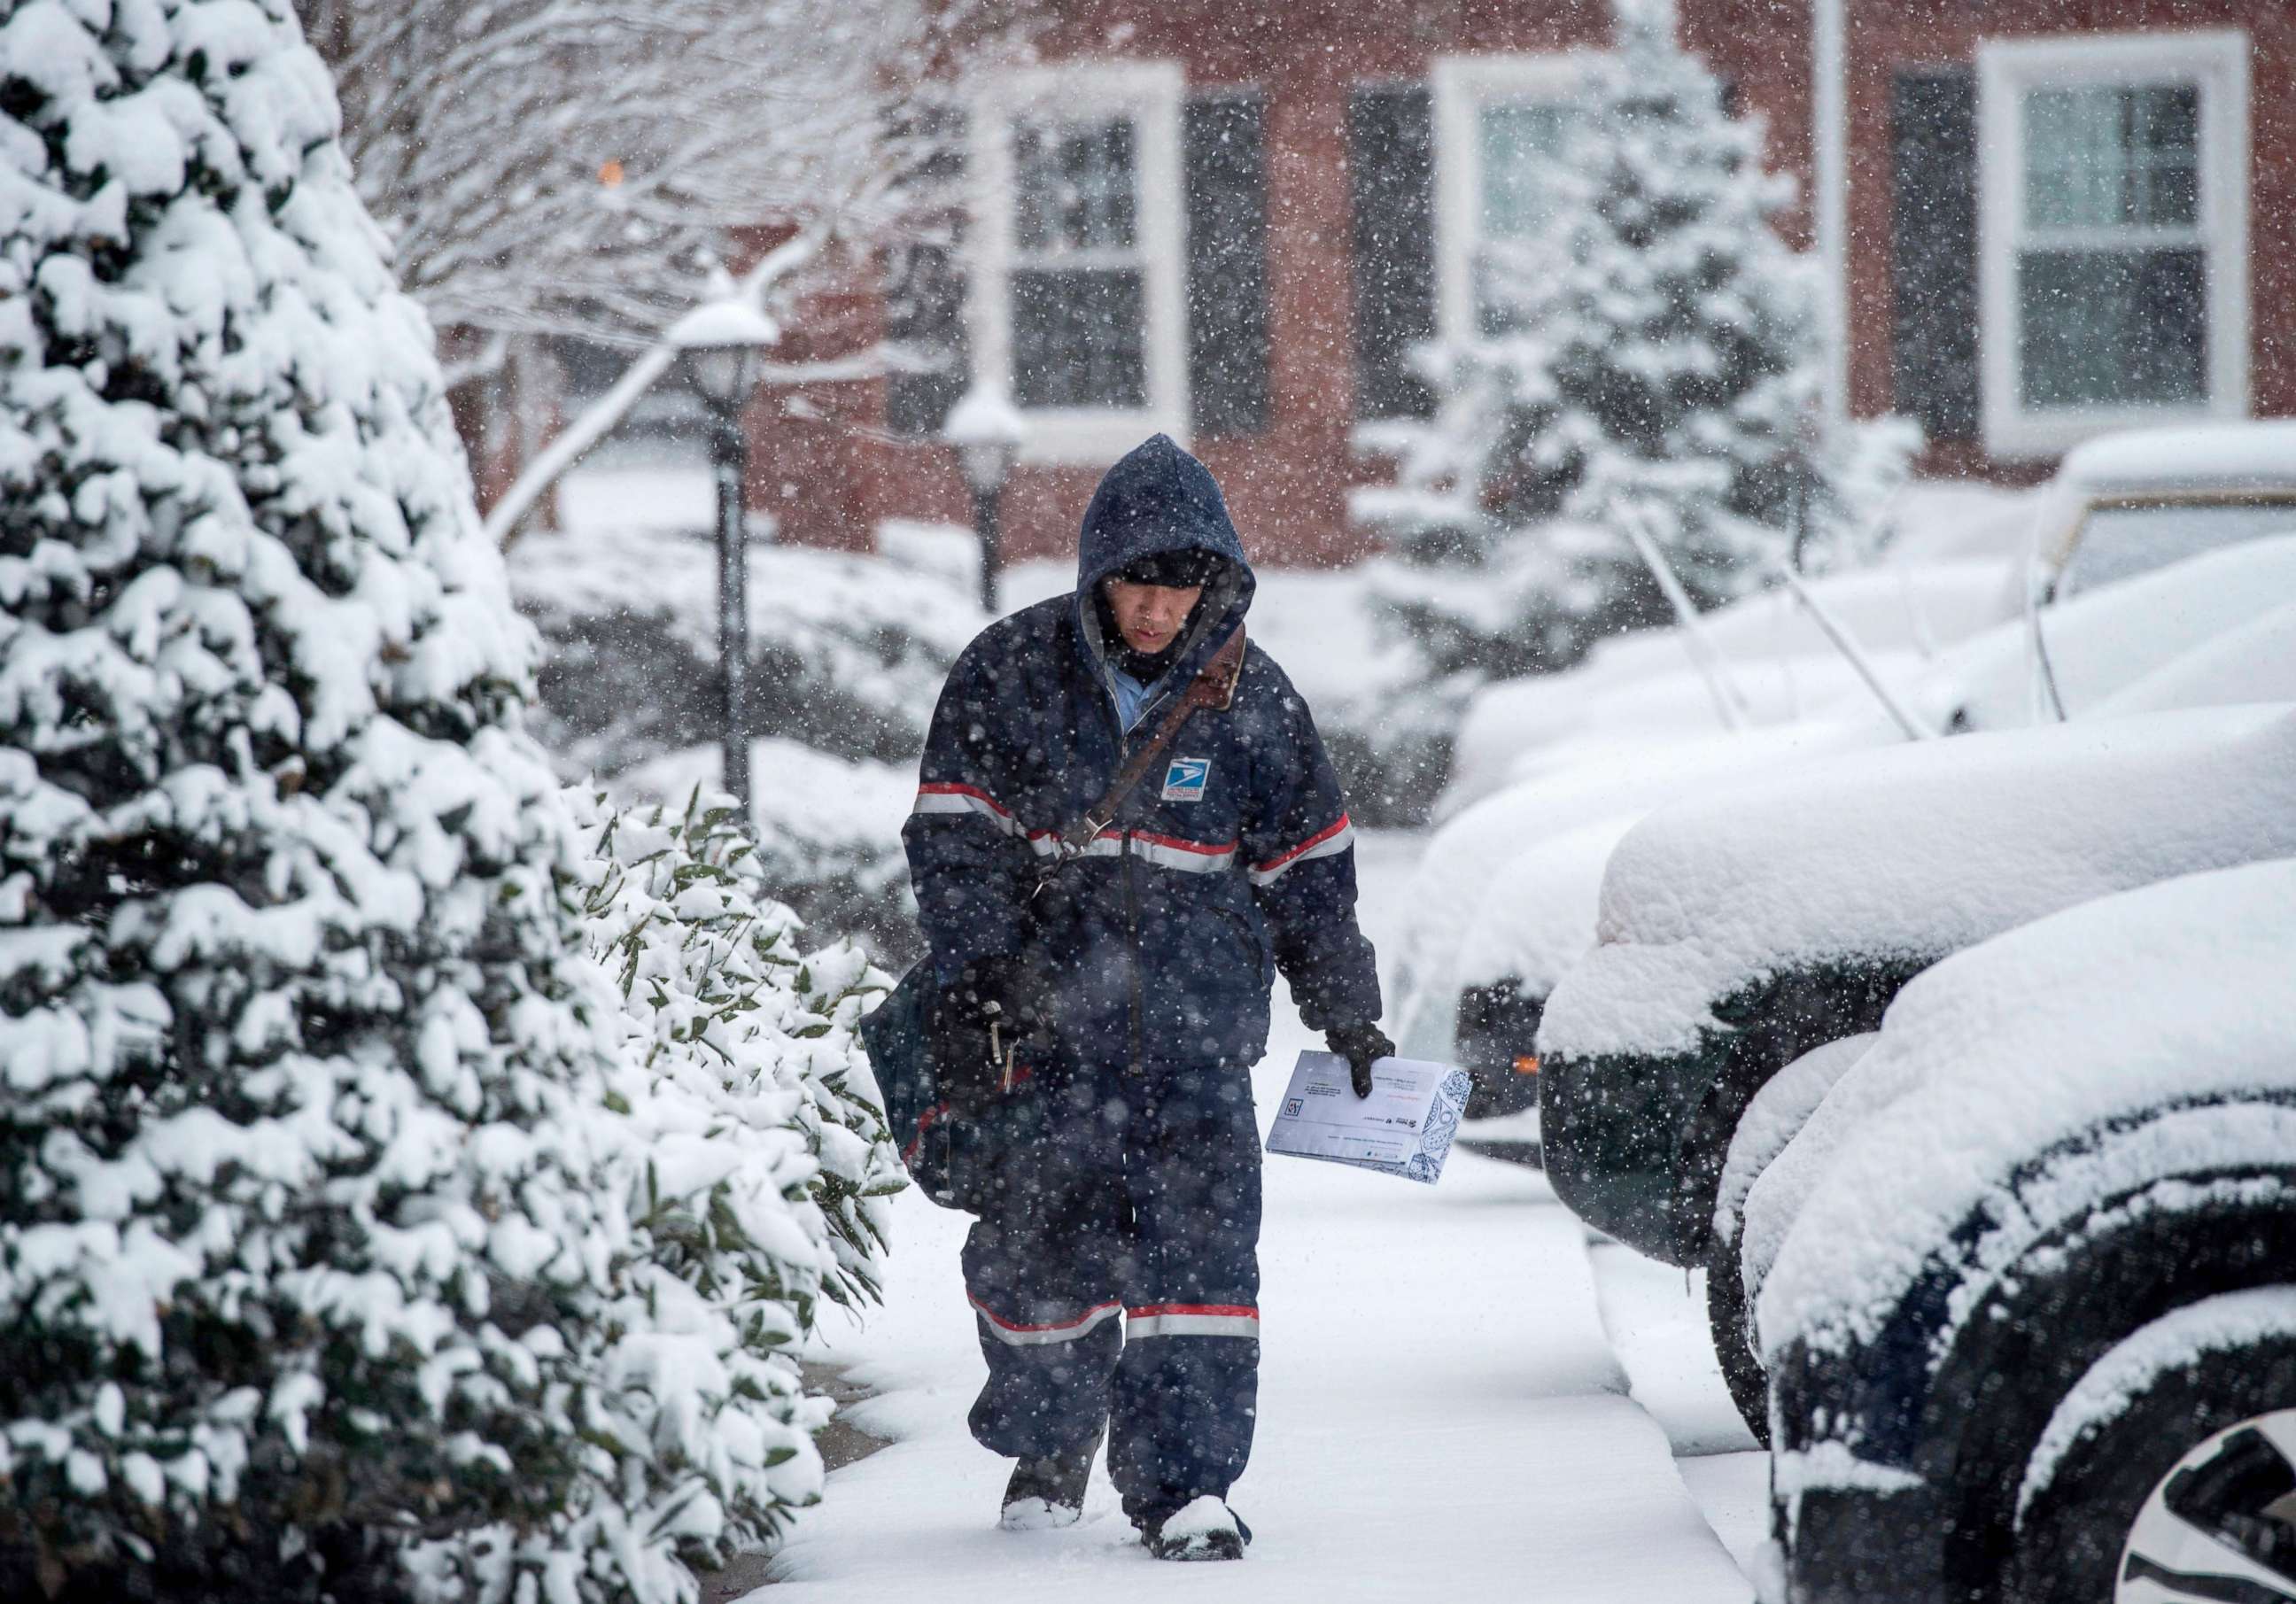 PHOTO: A postman walks through snow to deliver mail during the latest storm to hit the U.S. east coast, March 21, 2018, in Arlington, Va.